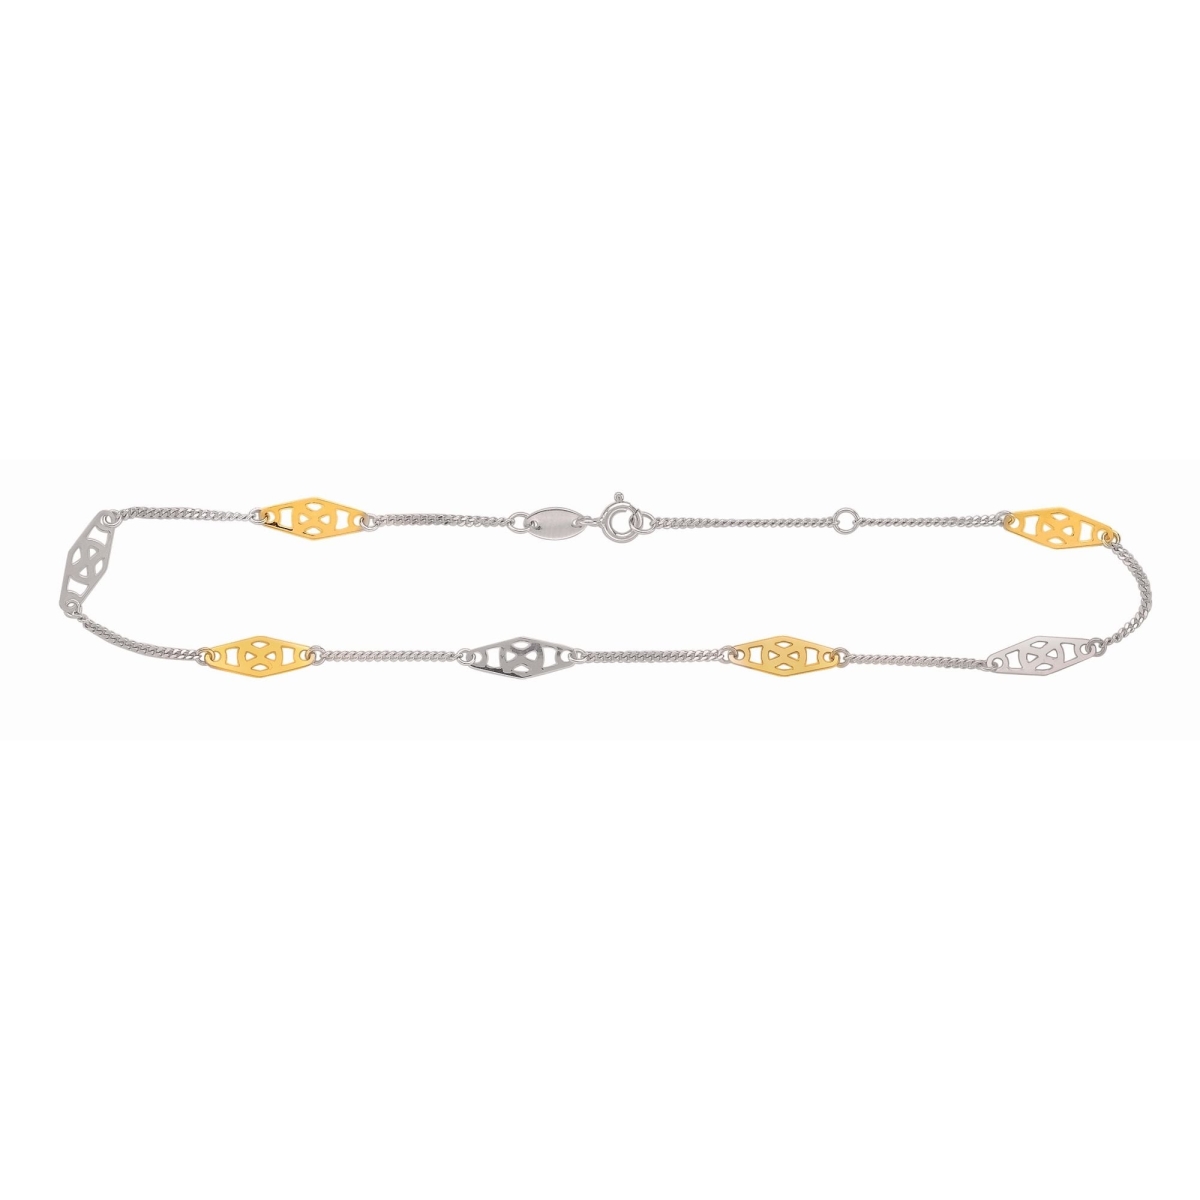 UPC 785704067459 product image for RDA101-10 10 in. 14K Sterling Silver Diamond Cut Textured Anklet with Spring Rin | upcitemdb.com